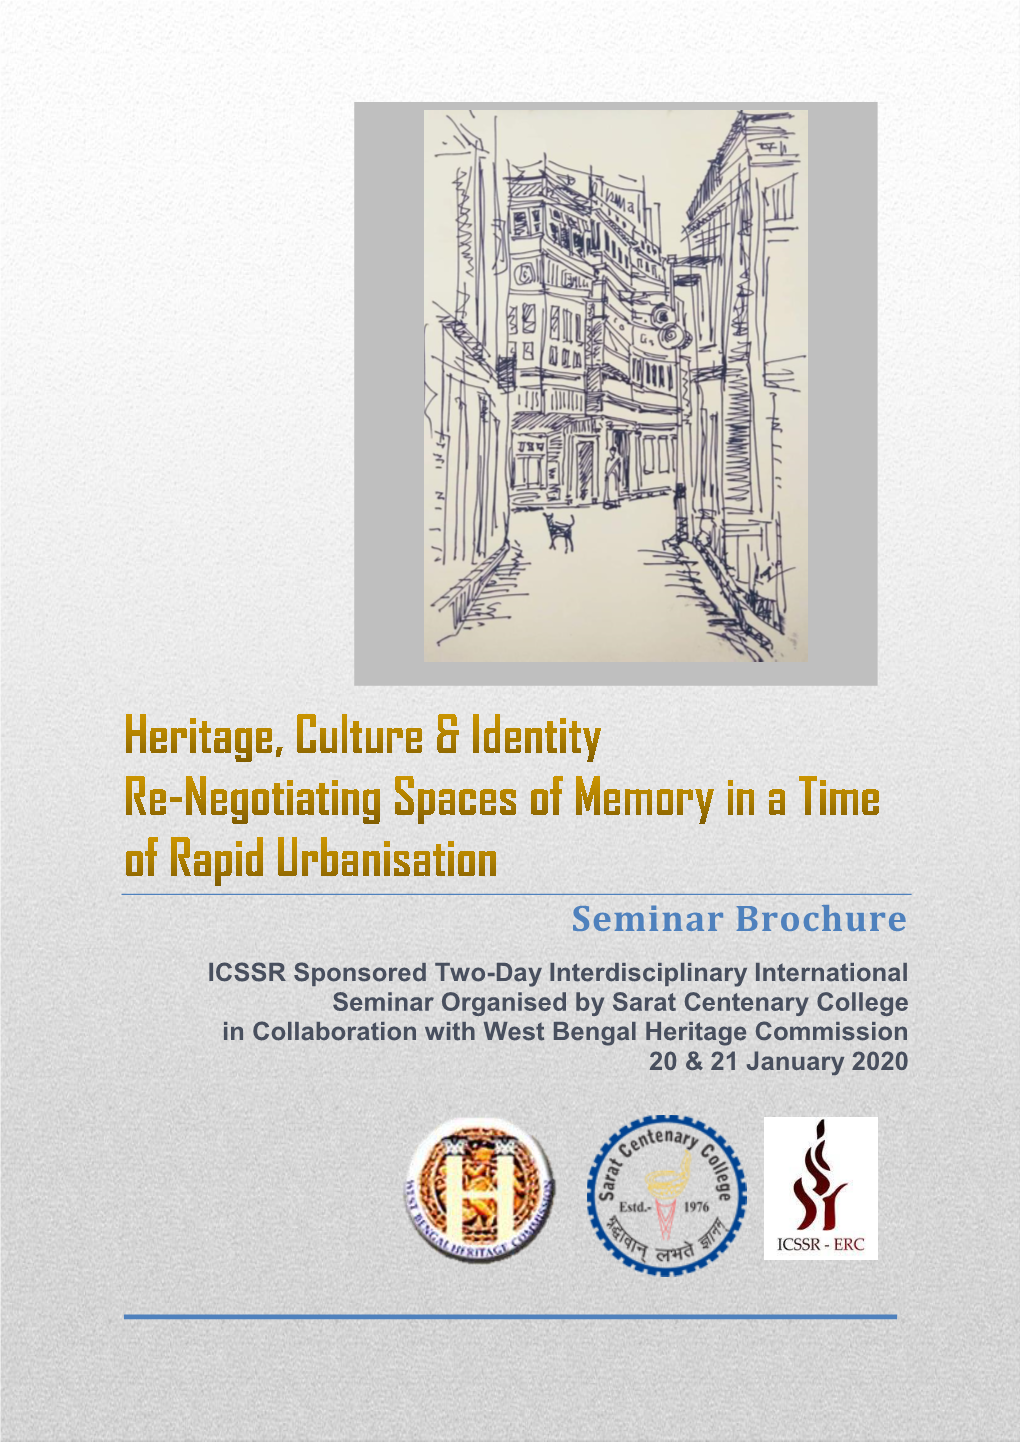 Heritage, Culture & Identity Re-Negotiating Spaces of Memory